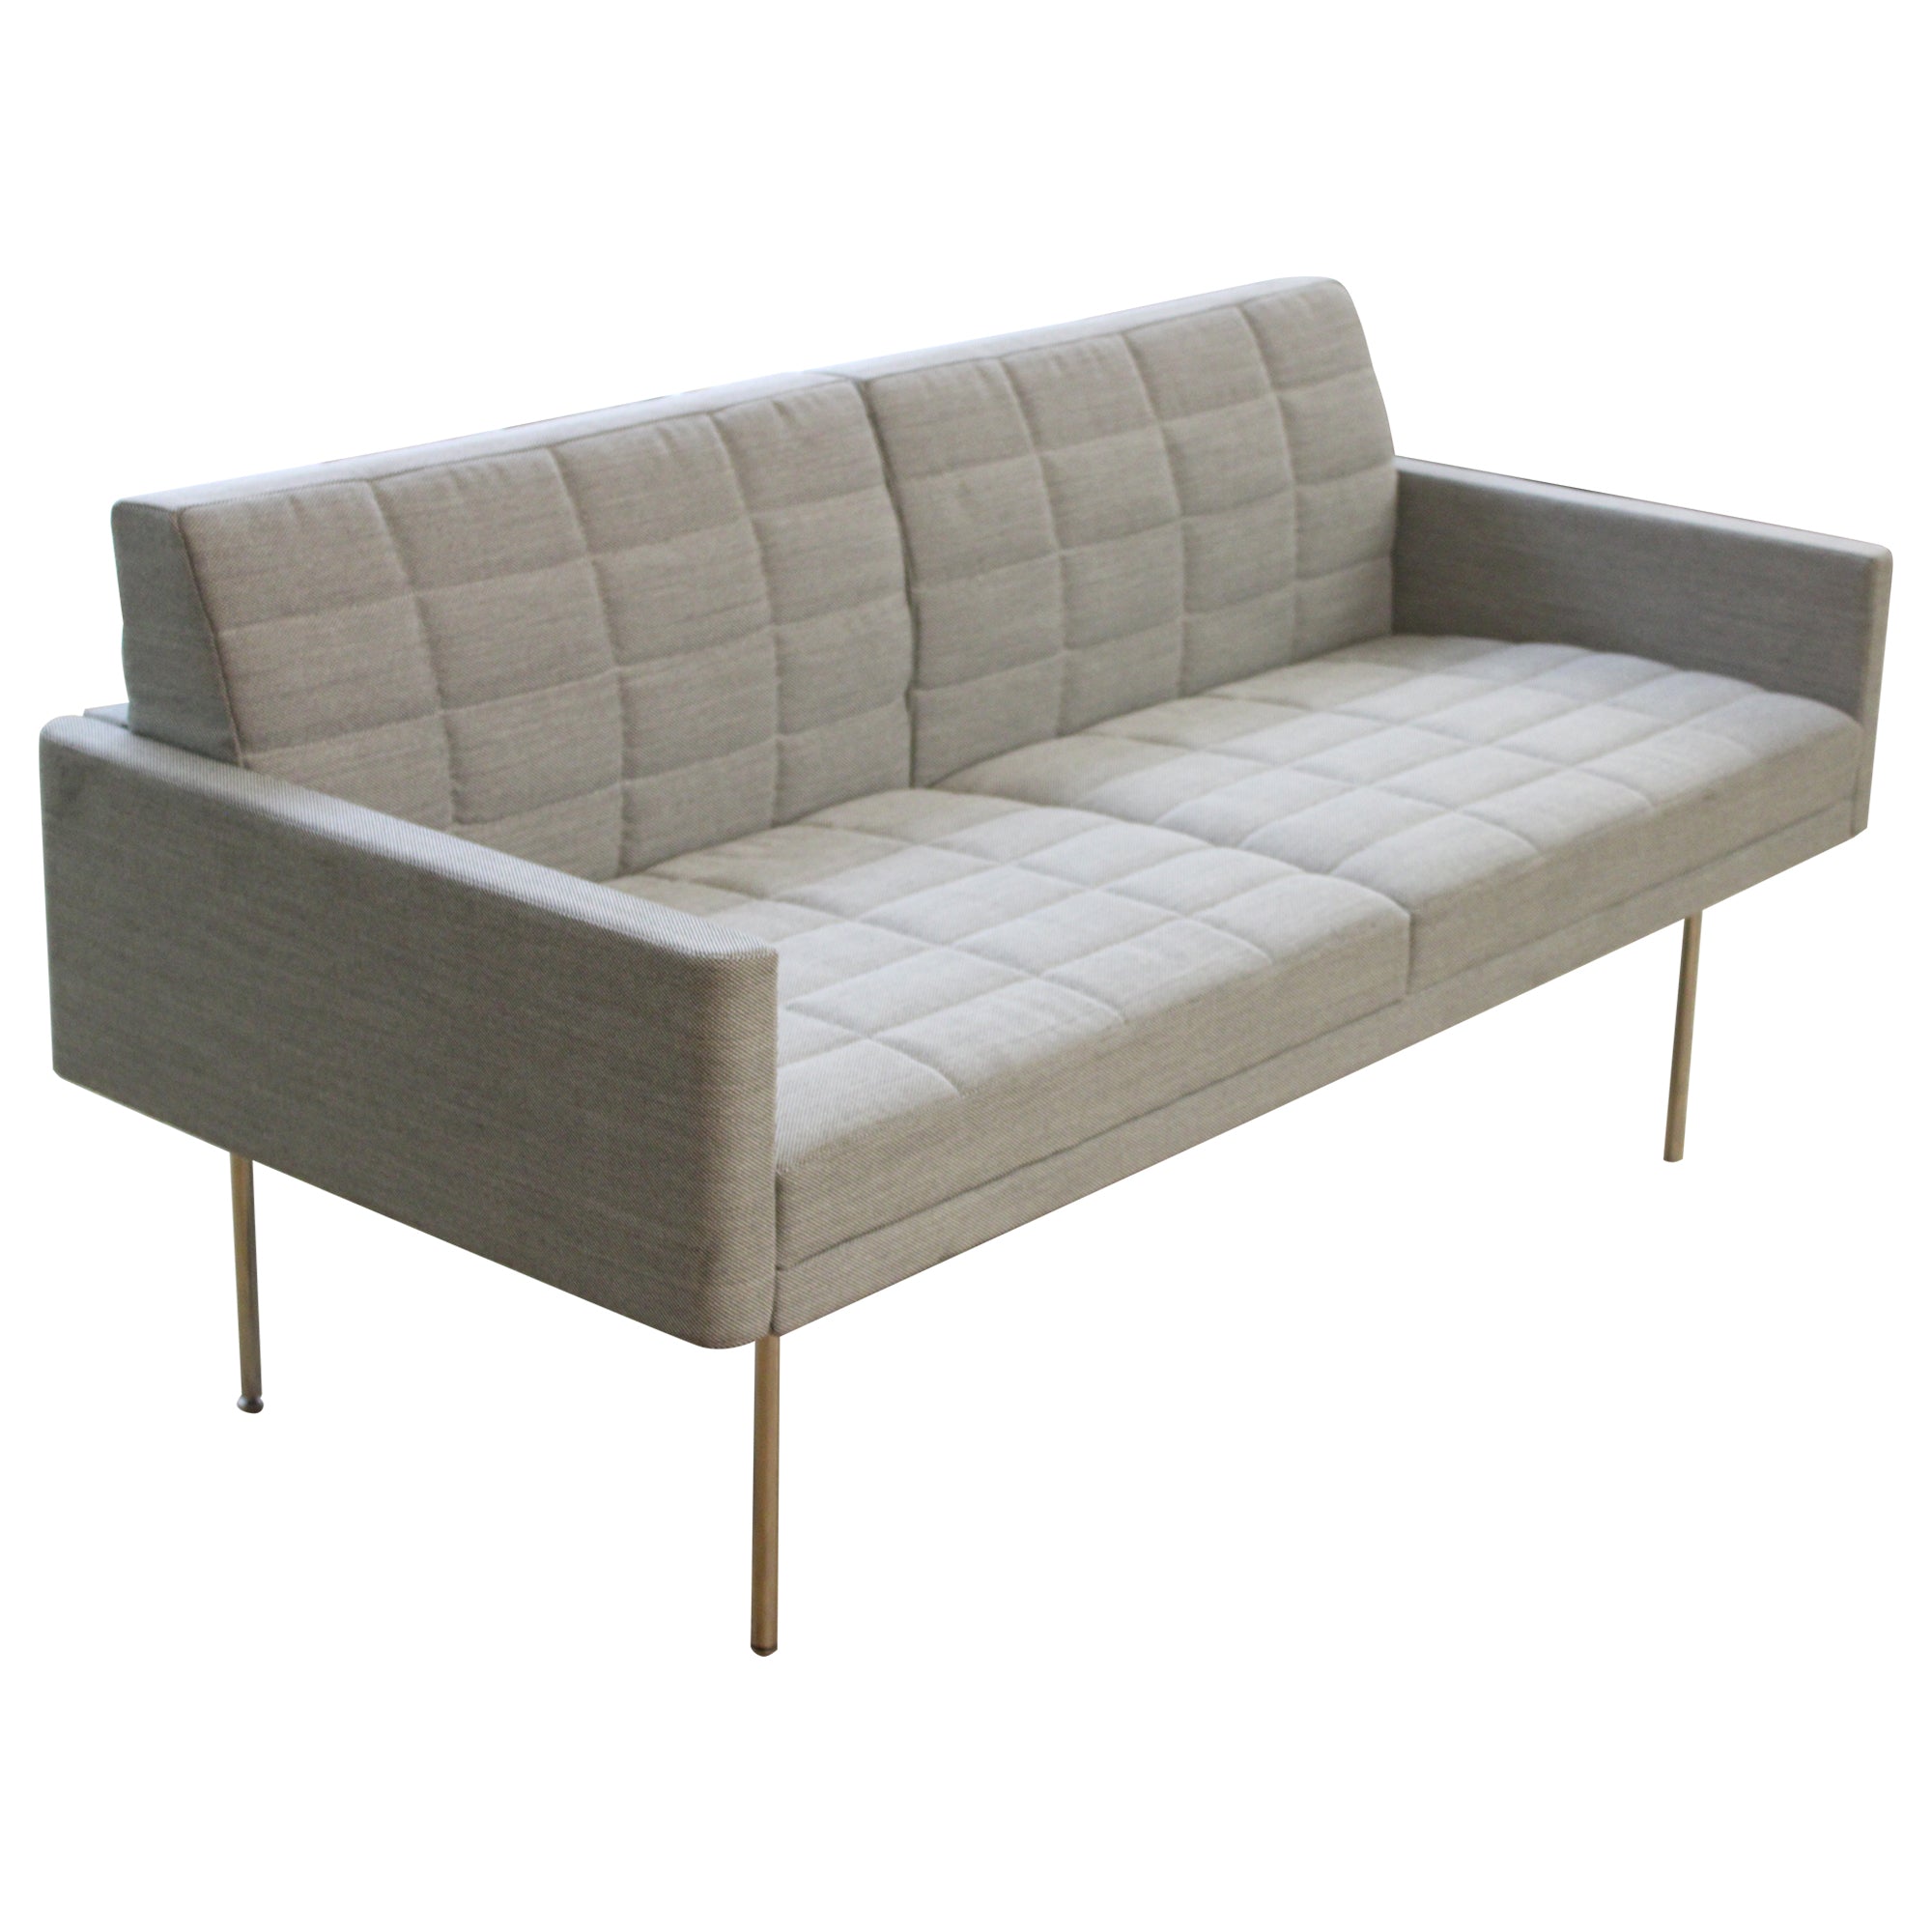 Geiger Tuxedo Settee - Preowned